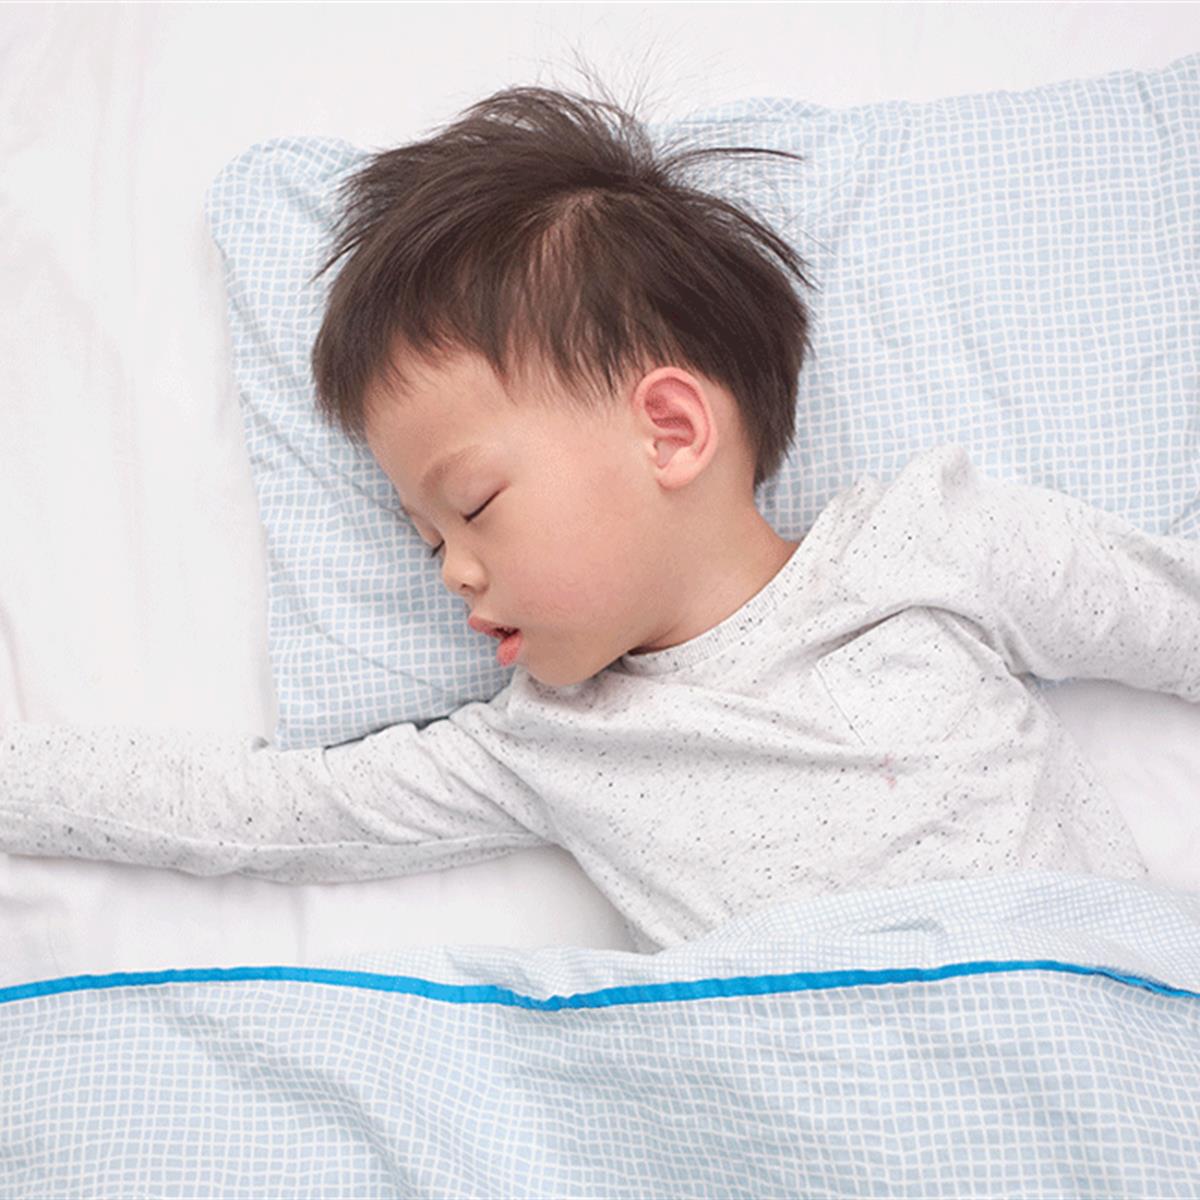 Big Kid Beds: When to Switch From a Crib 